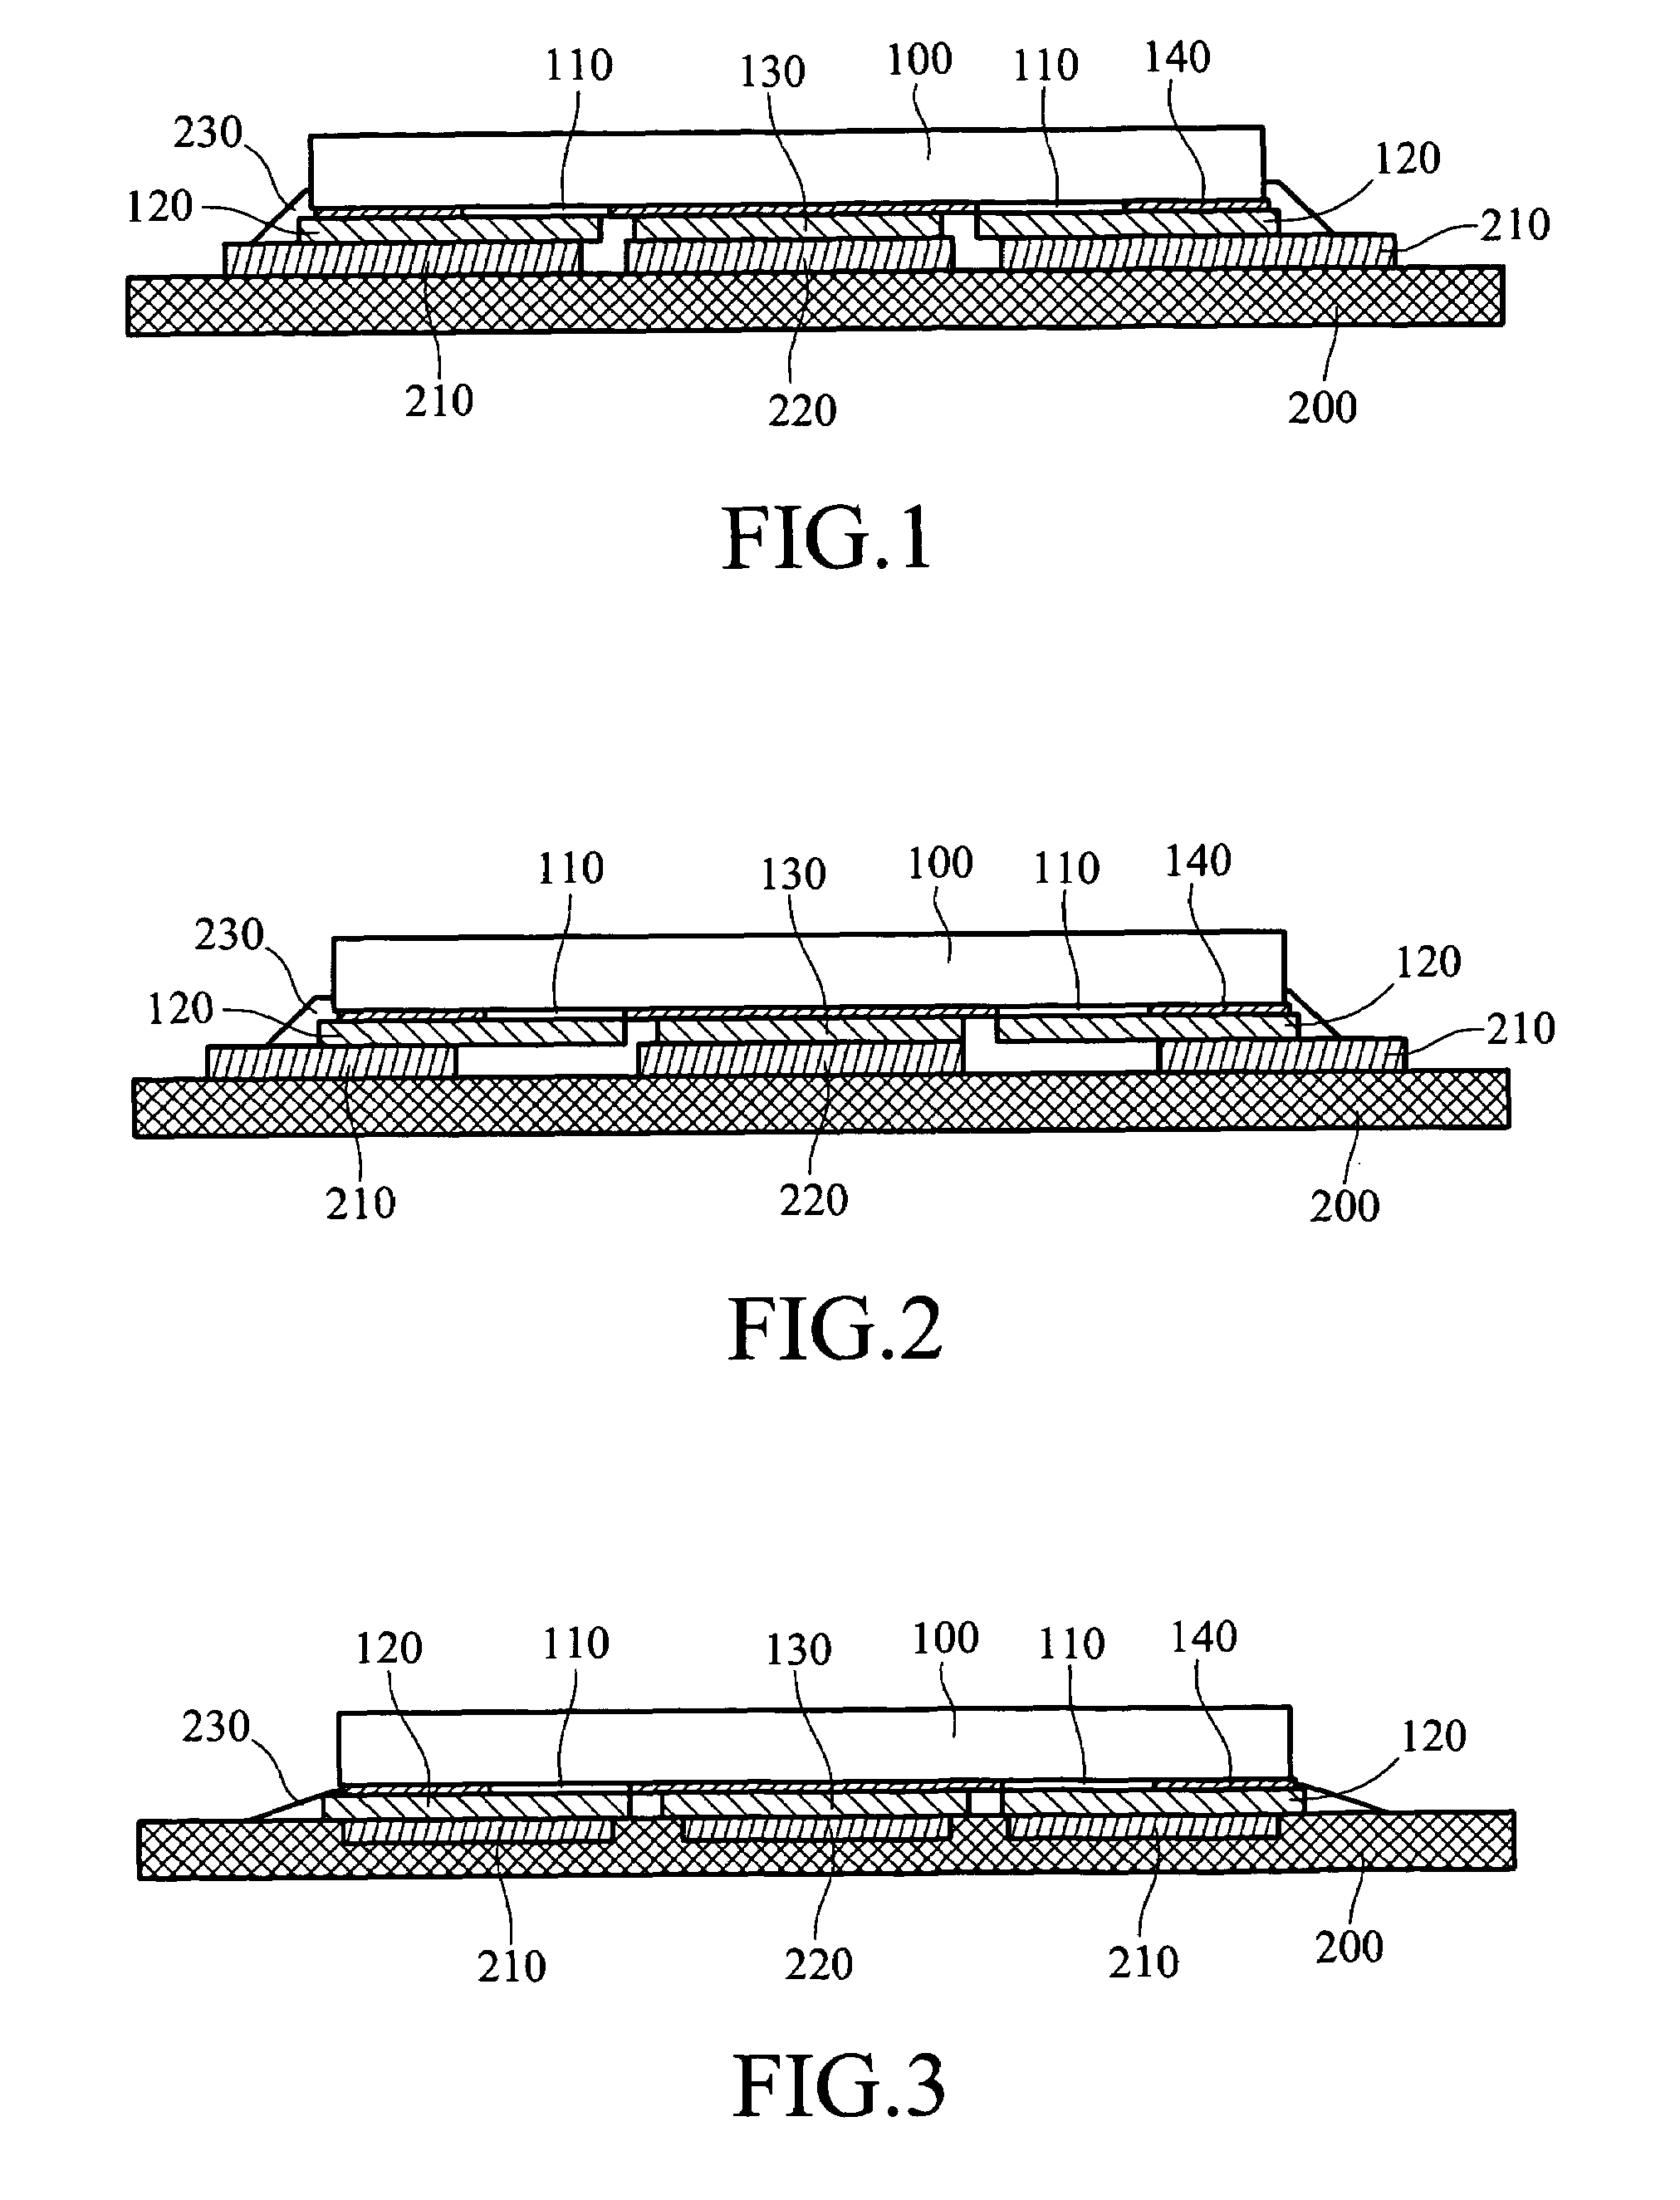 Bonding structure of device packaging